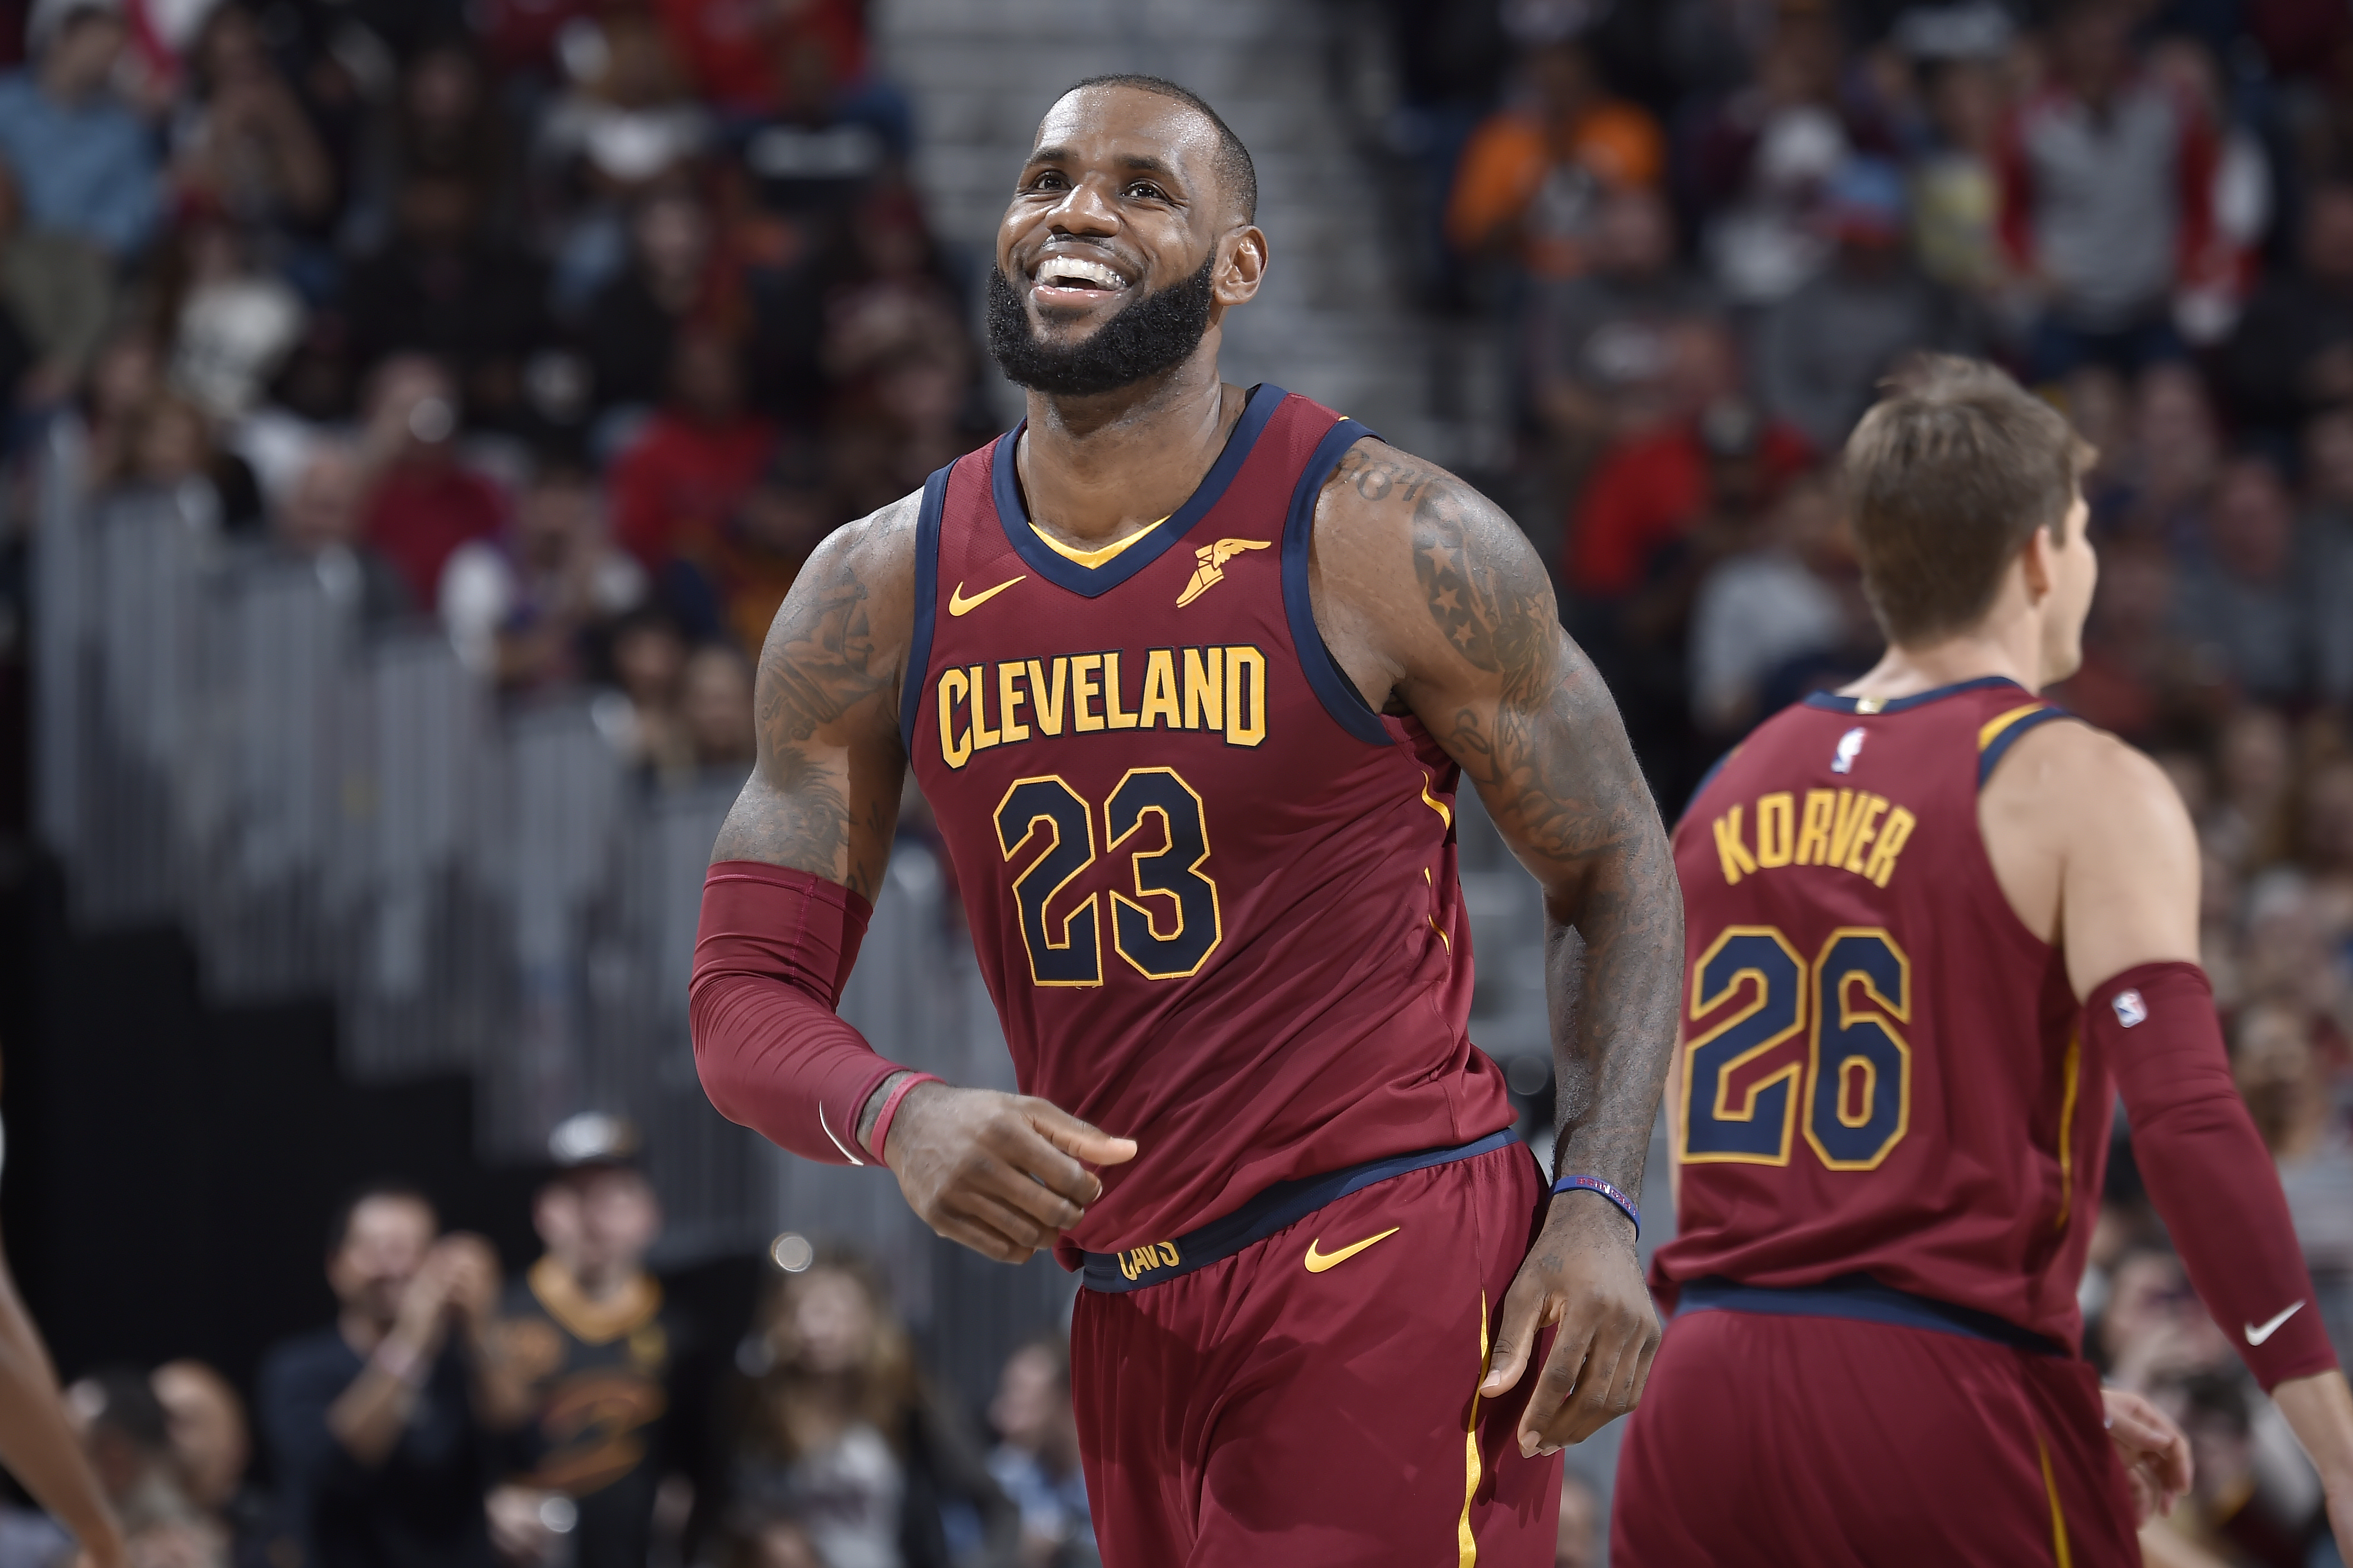 Cleveland Cavaliers' LeBron James poses during NBA basketball